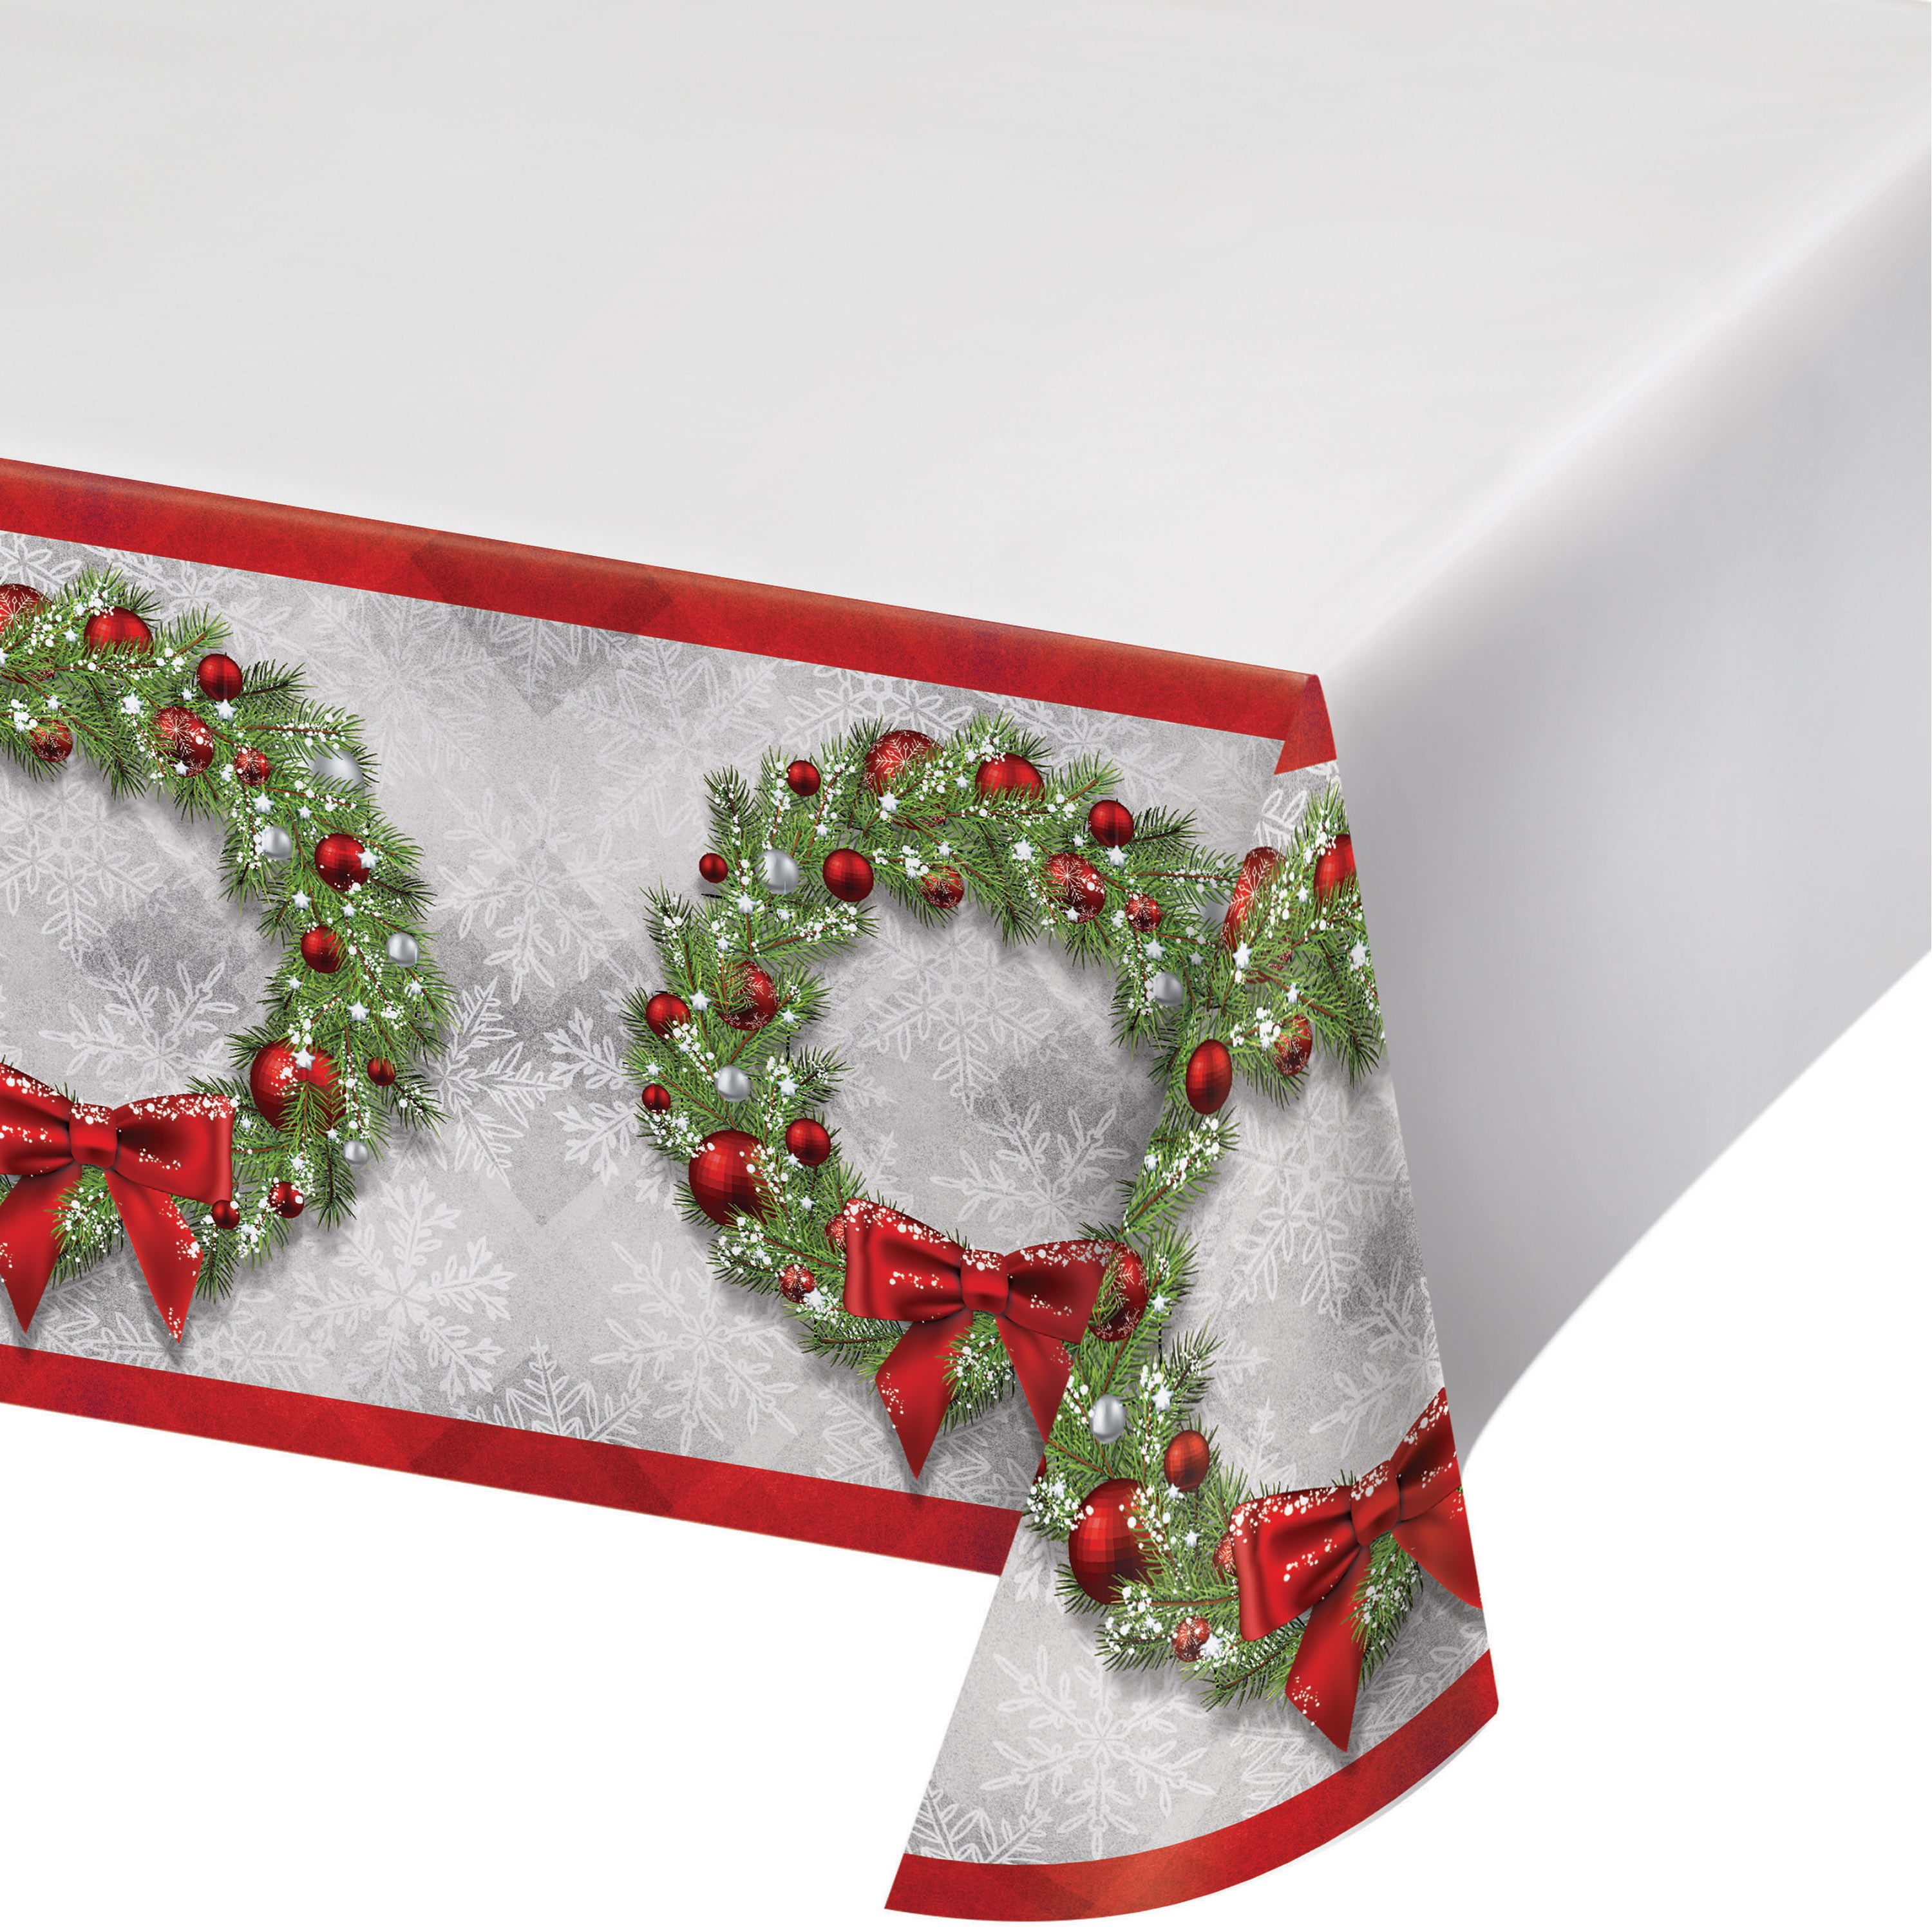 Christmas Wreath Plastic Tablecloth, 1 pack